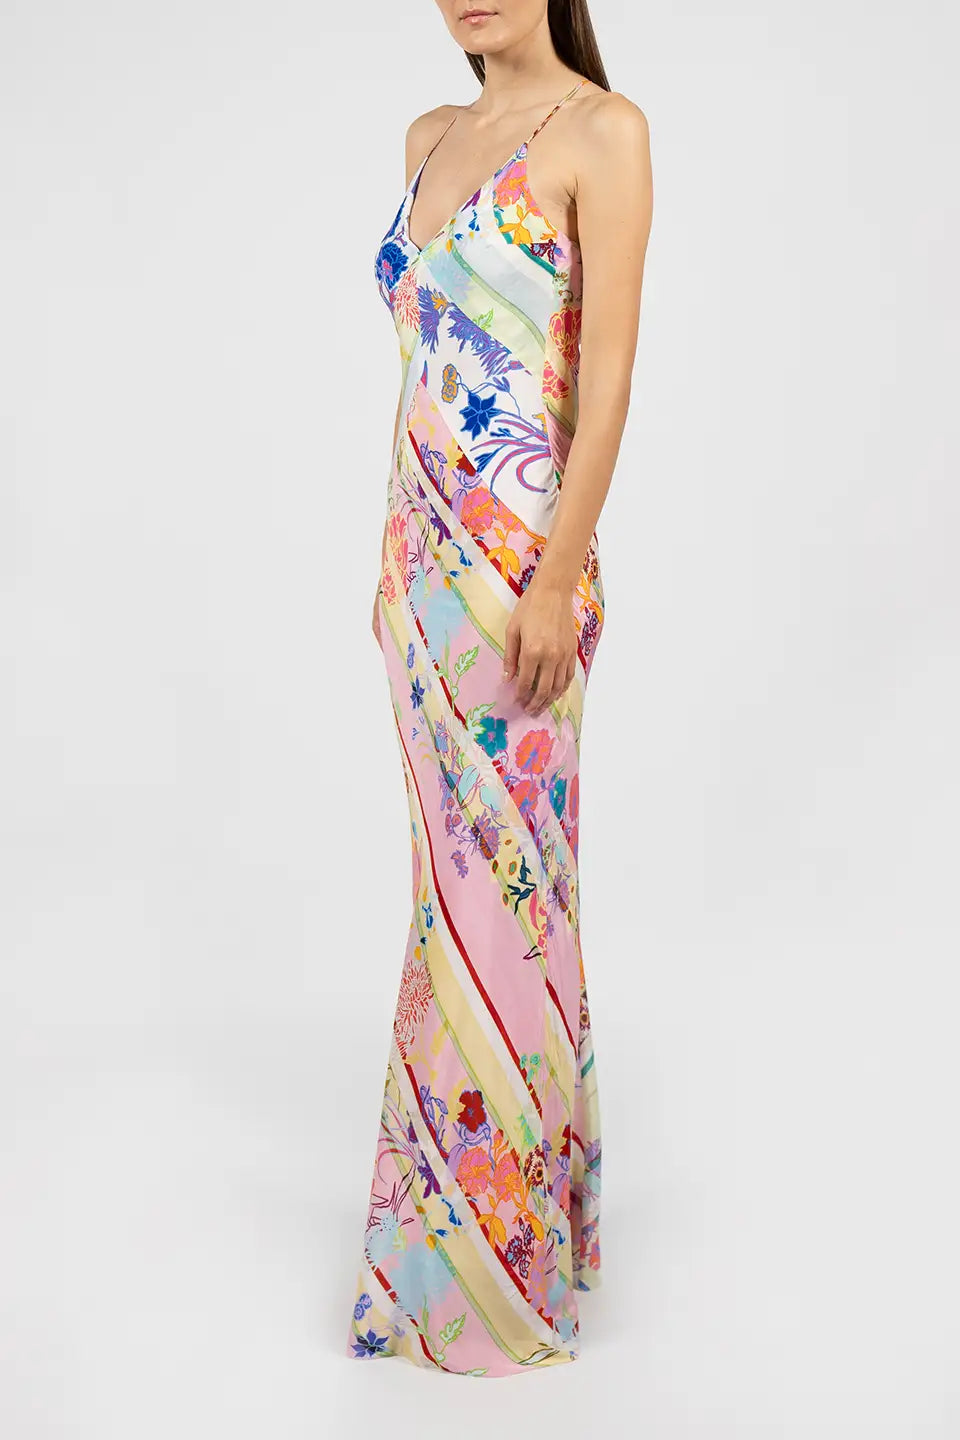 Designer White Maxi dresses, shop online with free delivery in UAE. Product gallery 3